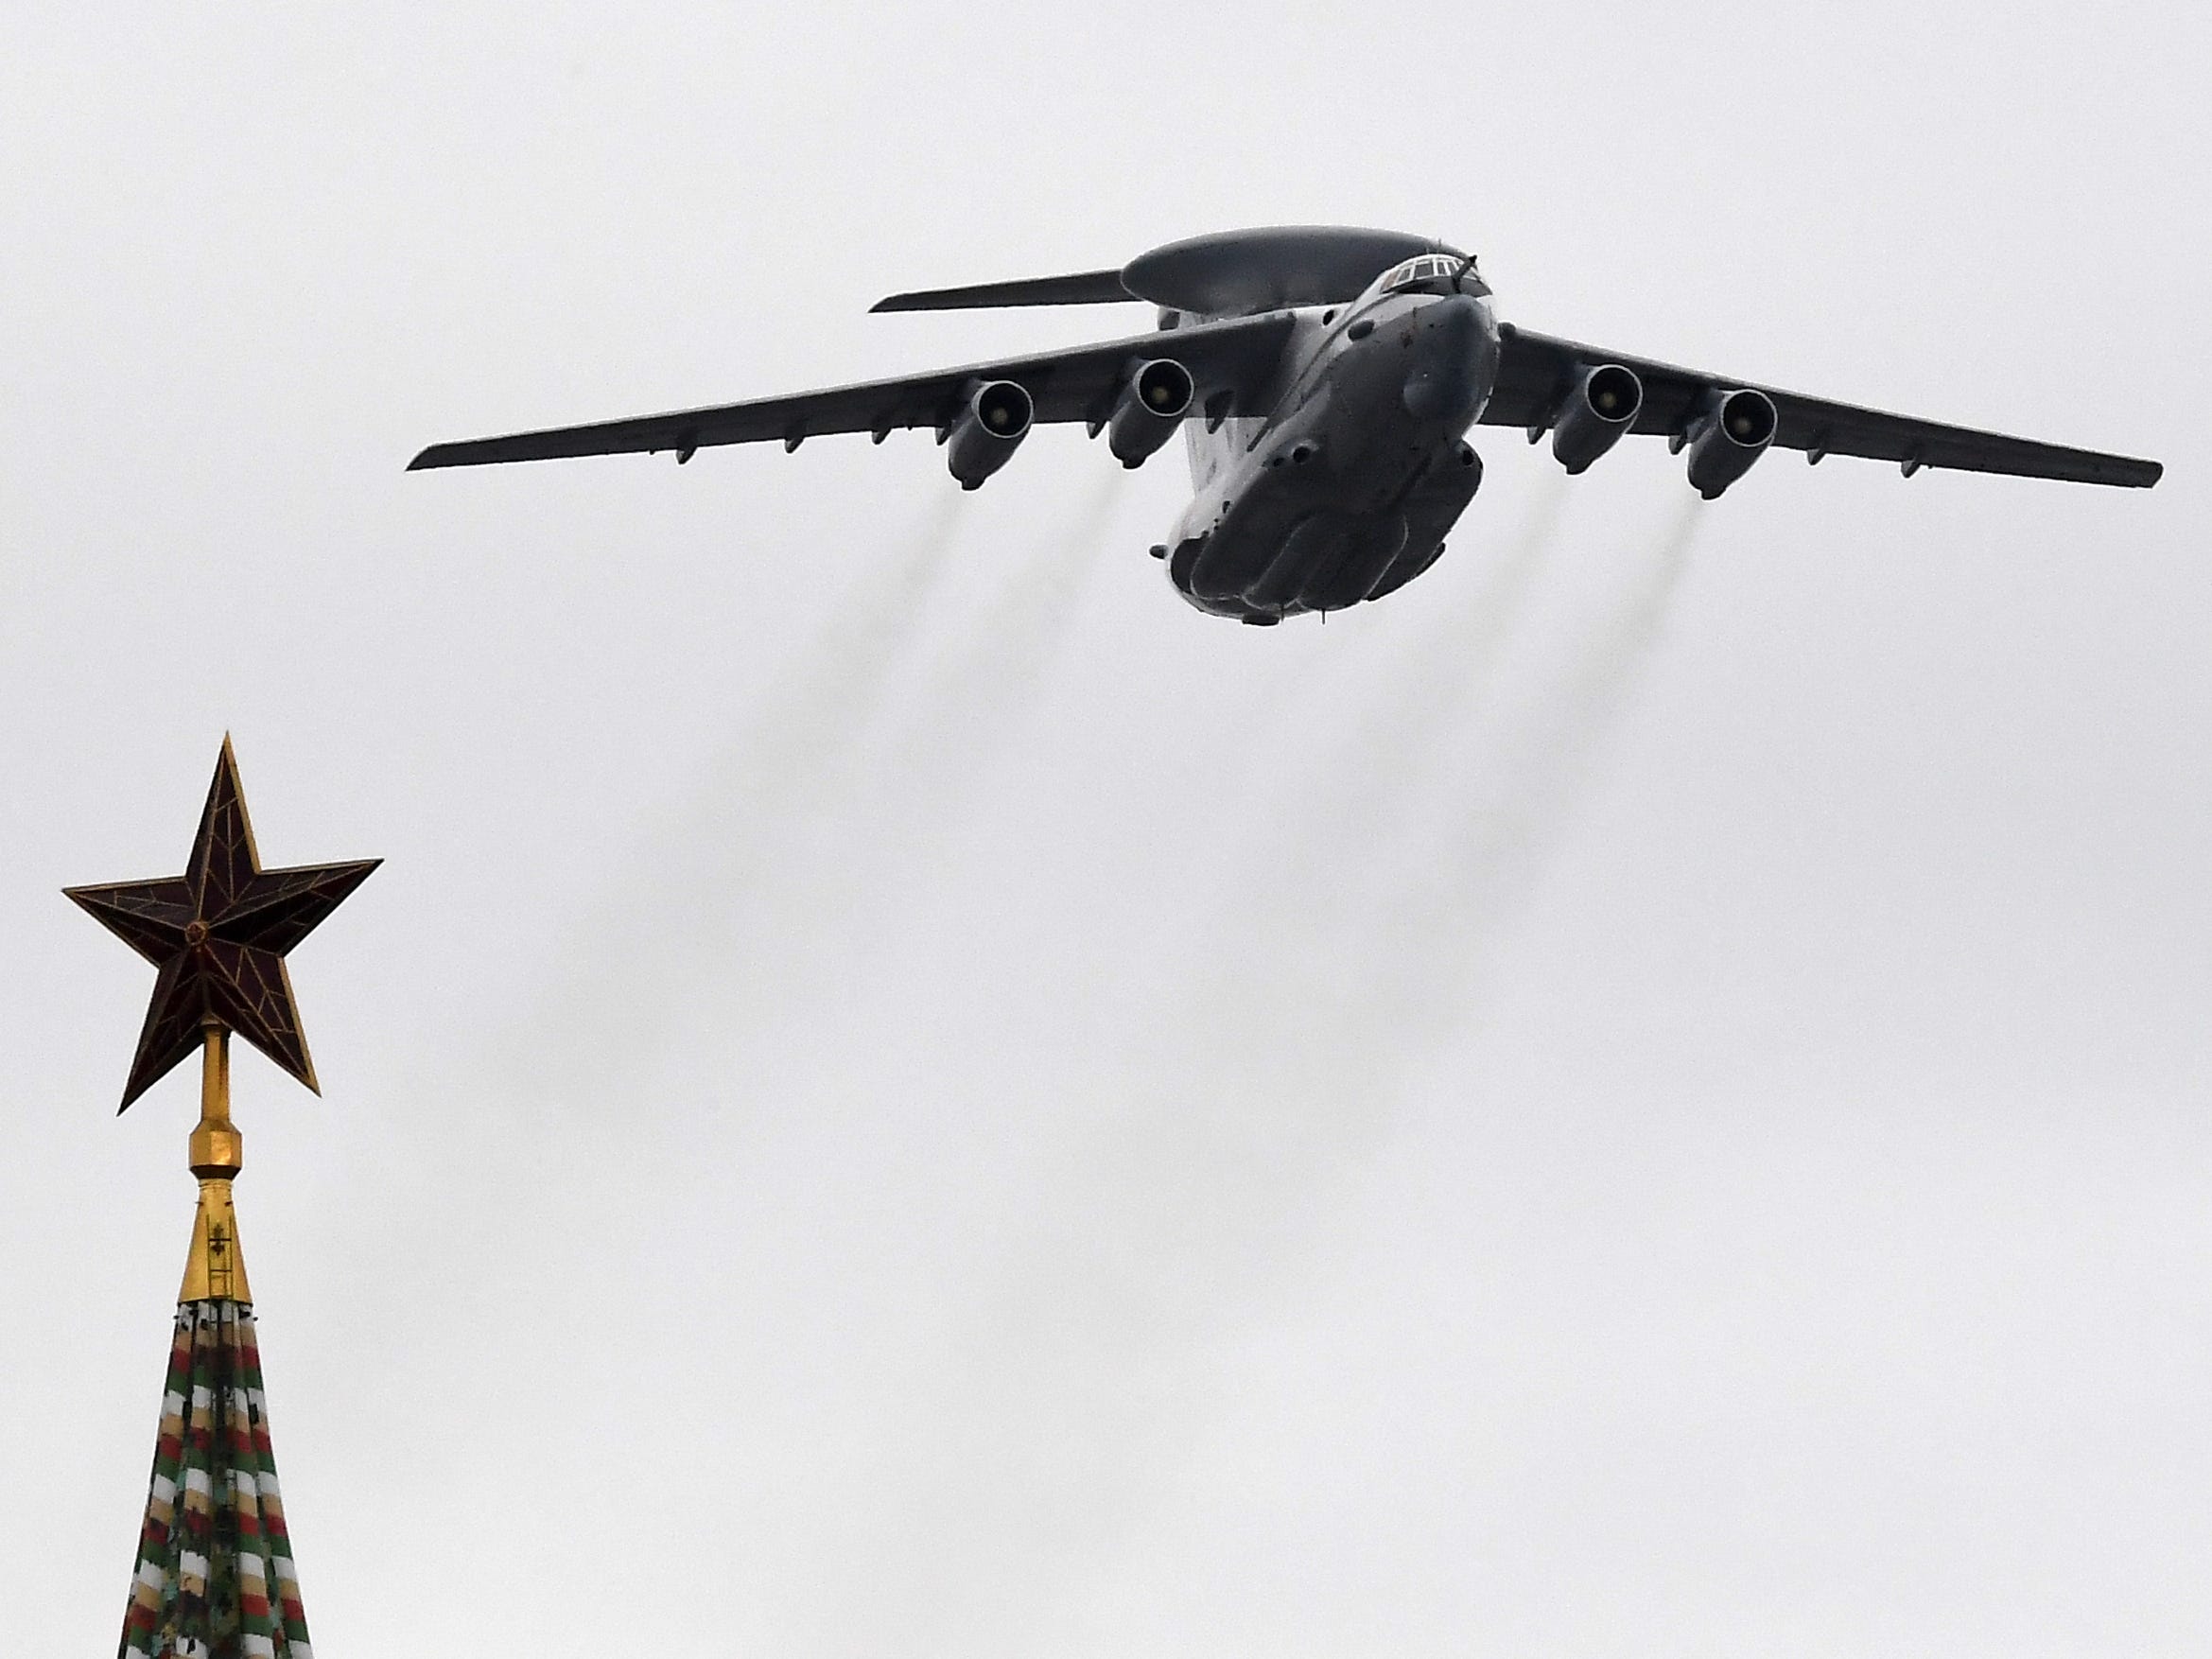 ukraine says it shot down a key russian spy plane — and russia's latest moves suggest it's worried